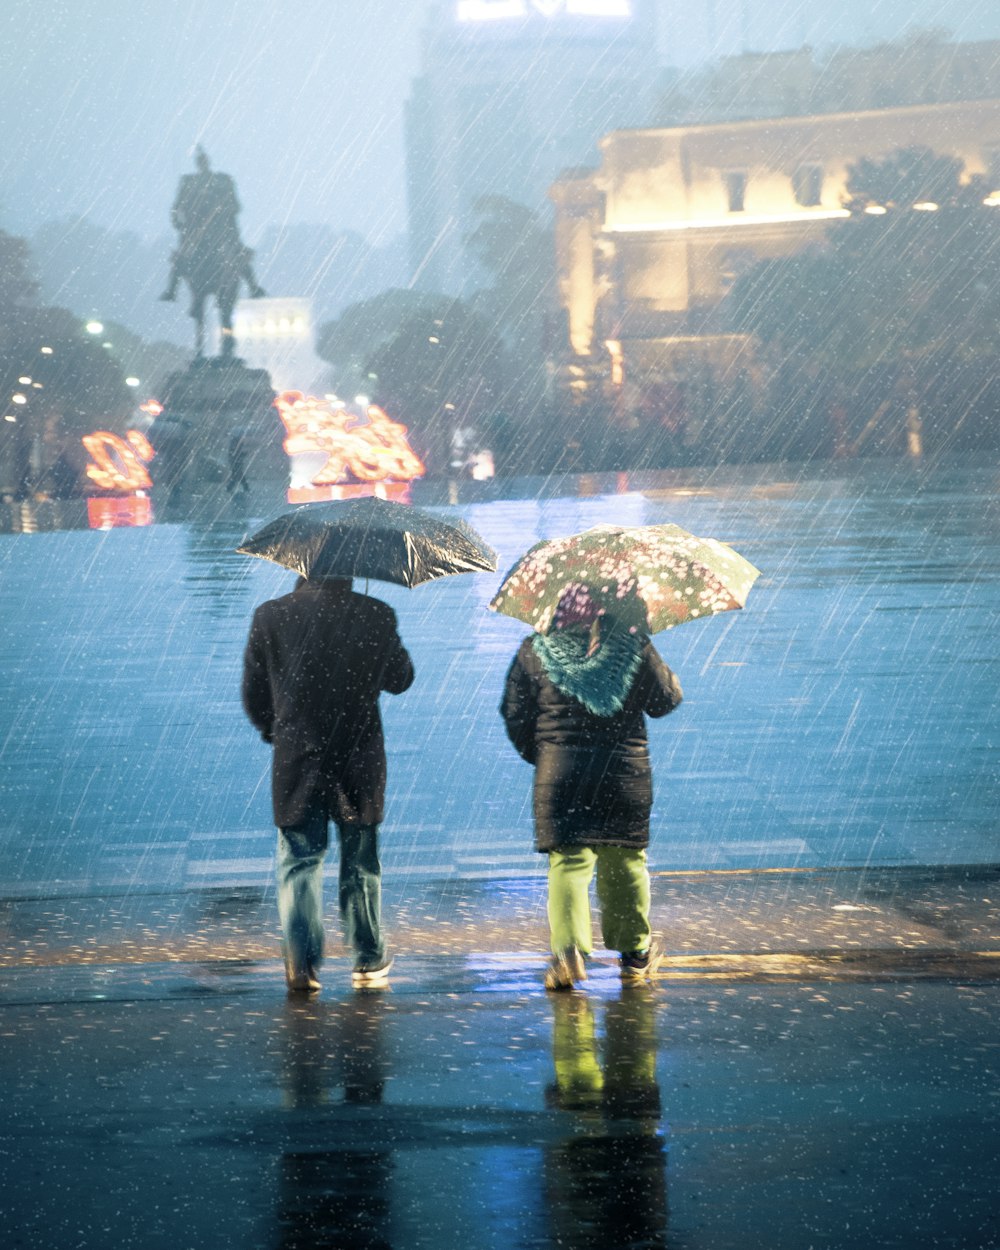 two people standing in the rain with umbrellas